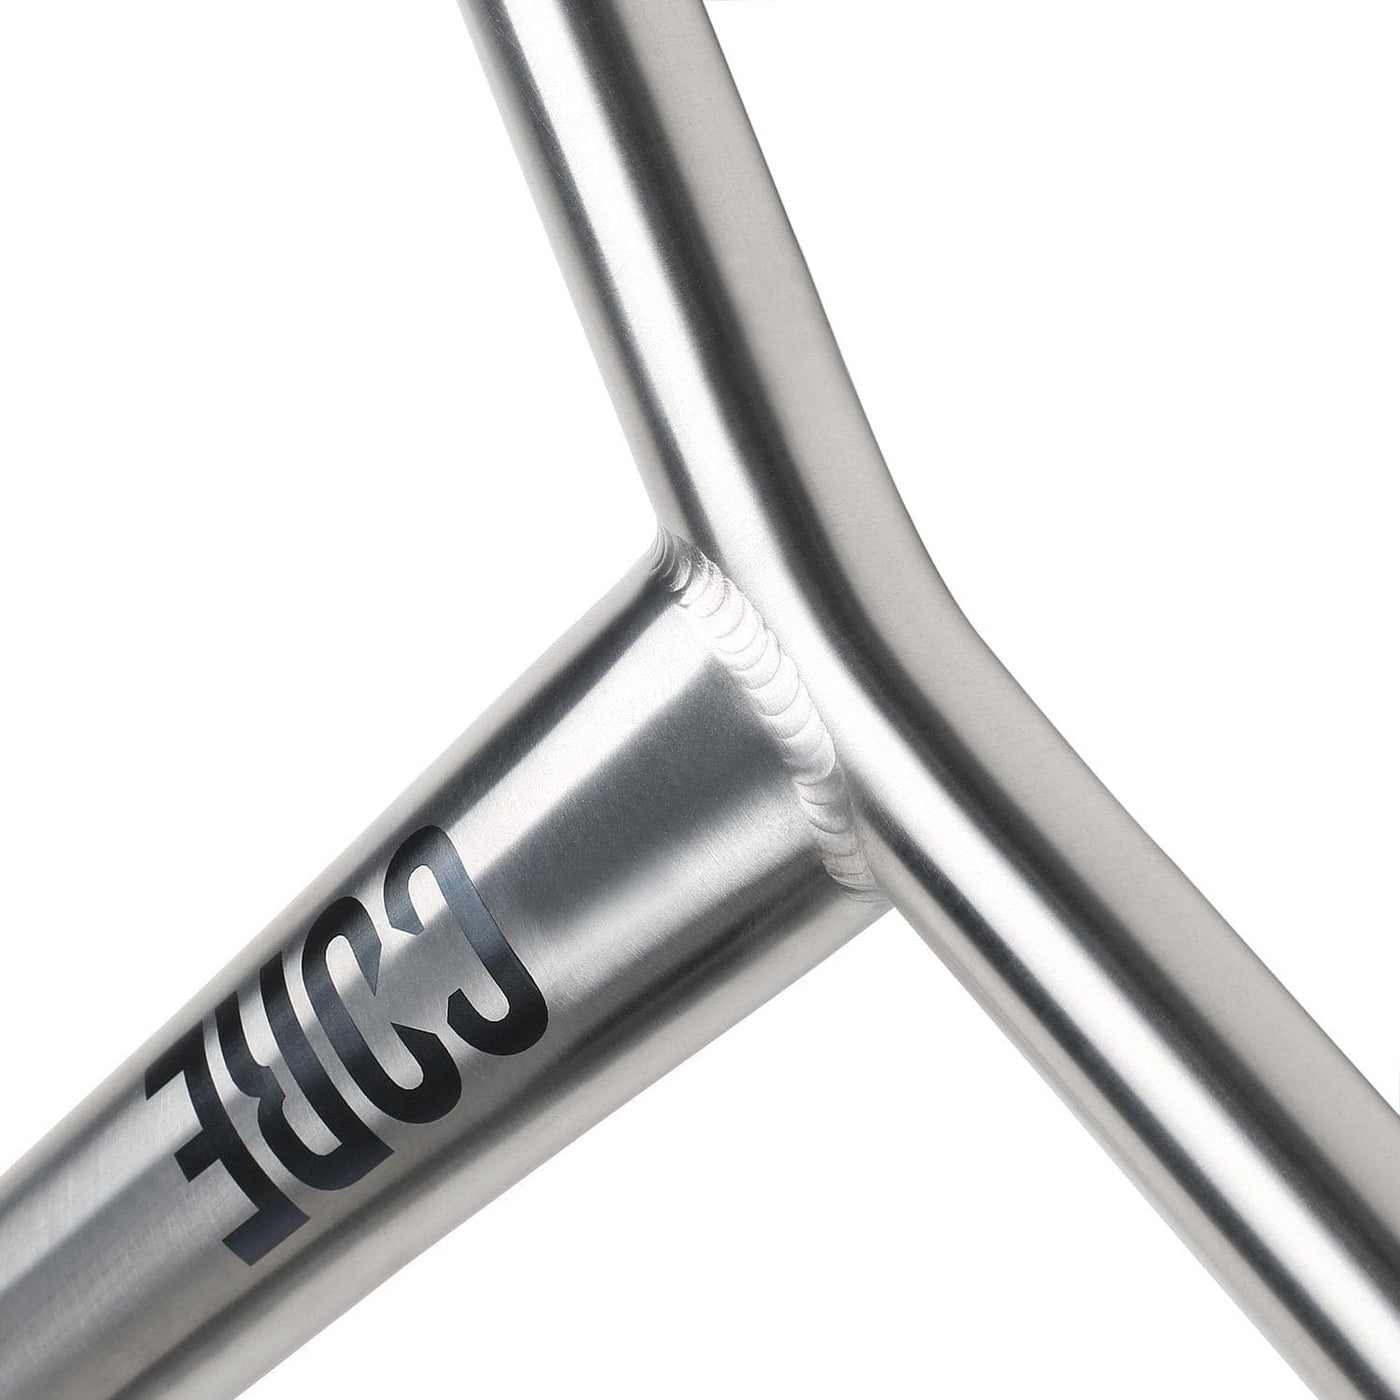 CORE Appolo Titanium Stunt Scooter Bar 580mm SCS/HIC Raw I Scooter Bar Zoomed Front